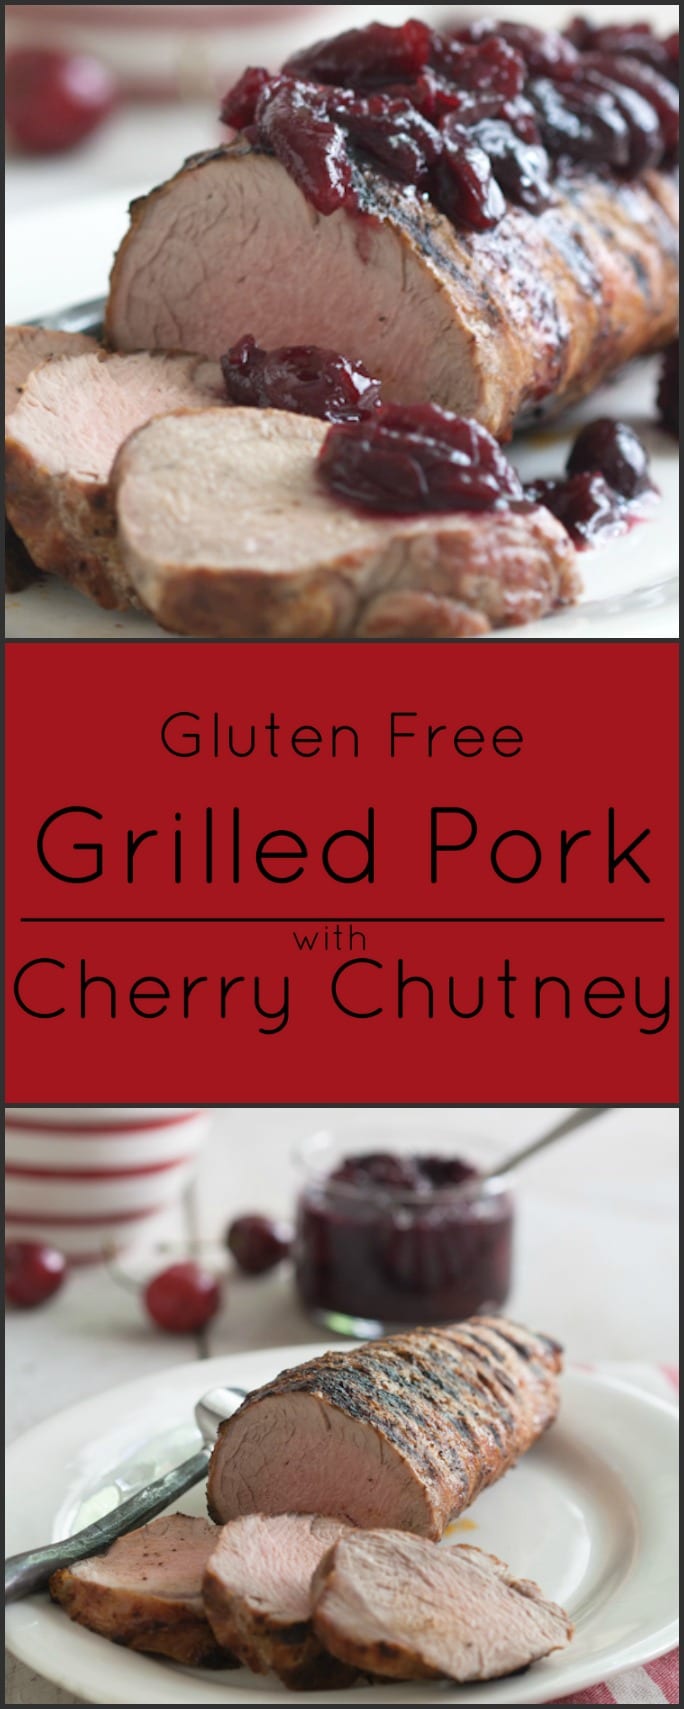 Grilled Pork Loin with Cherry Chutney. Perfect for grilling season. Gluten free!